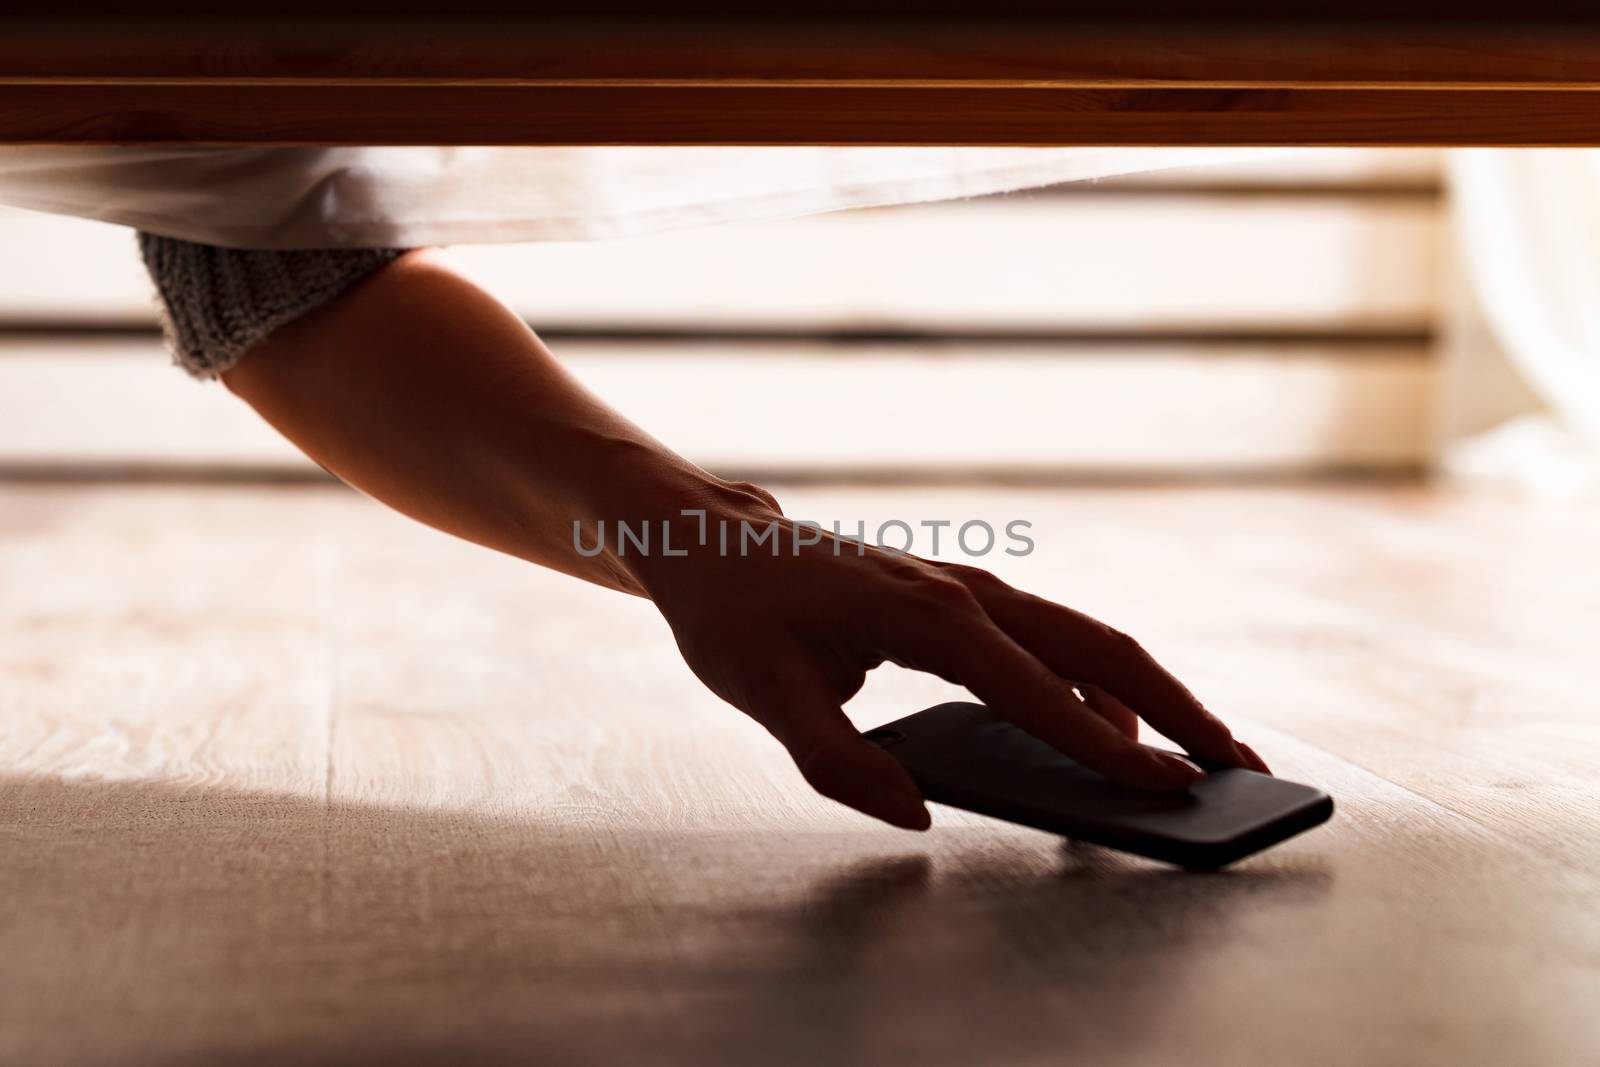 Someone is hiding a smartphone under the bed